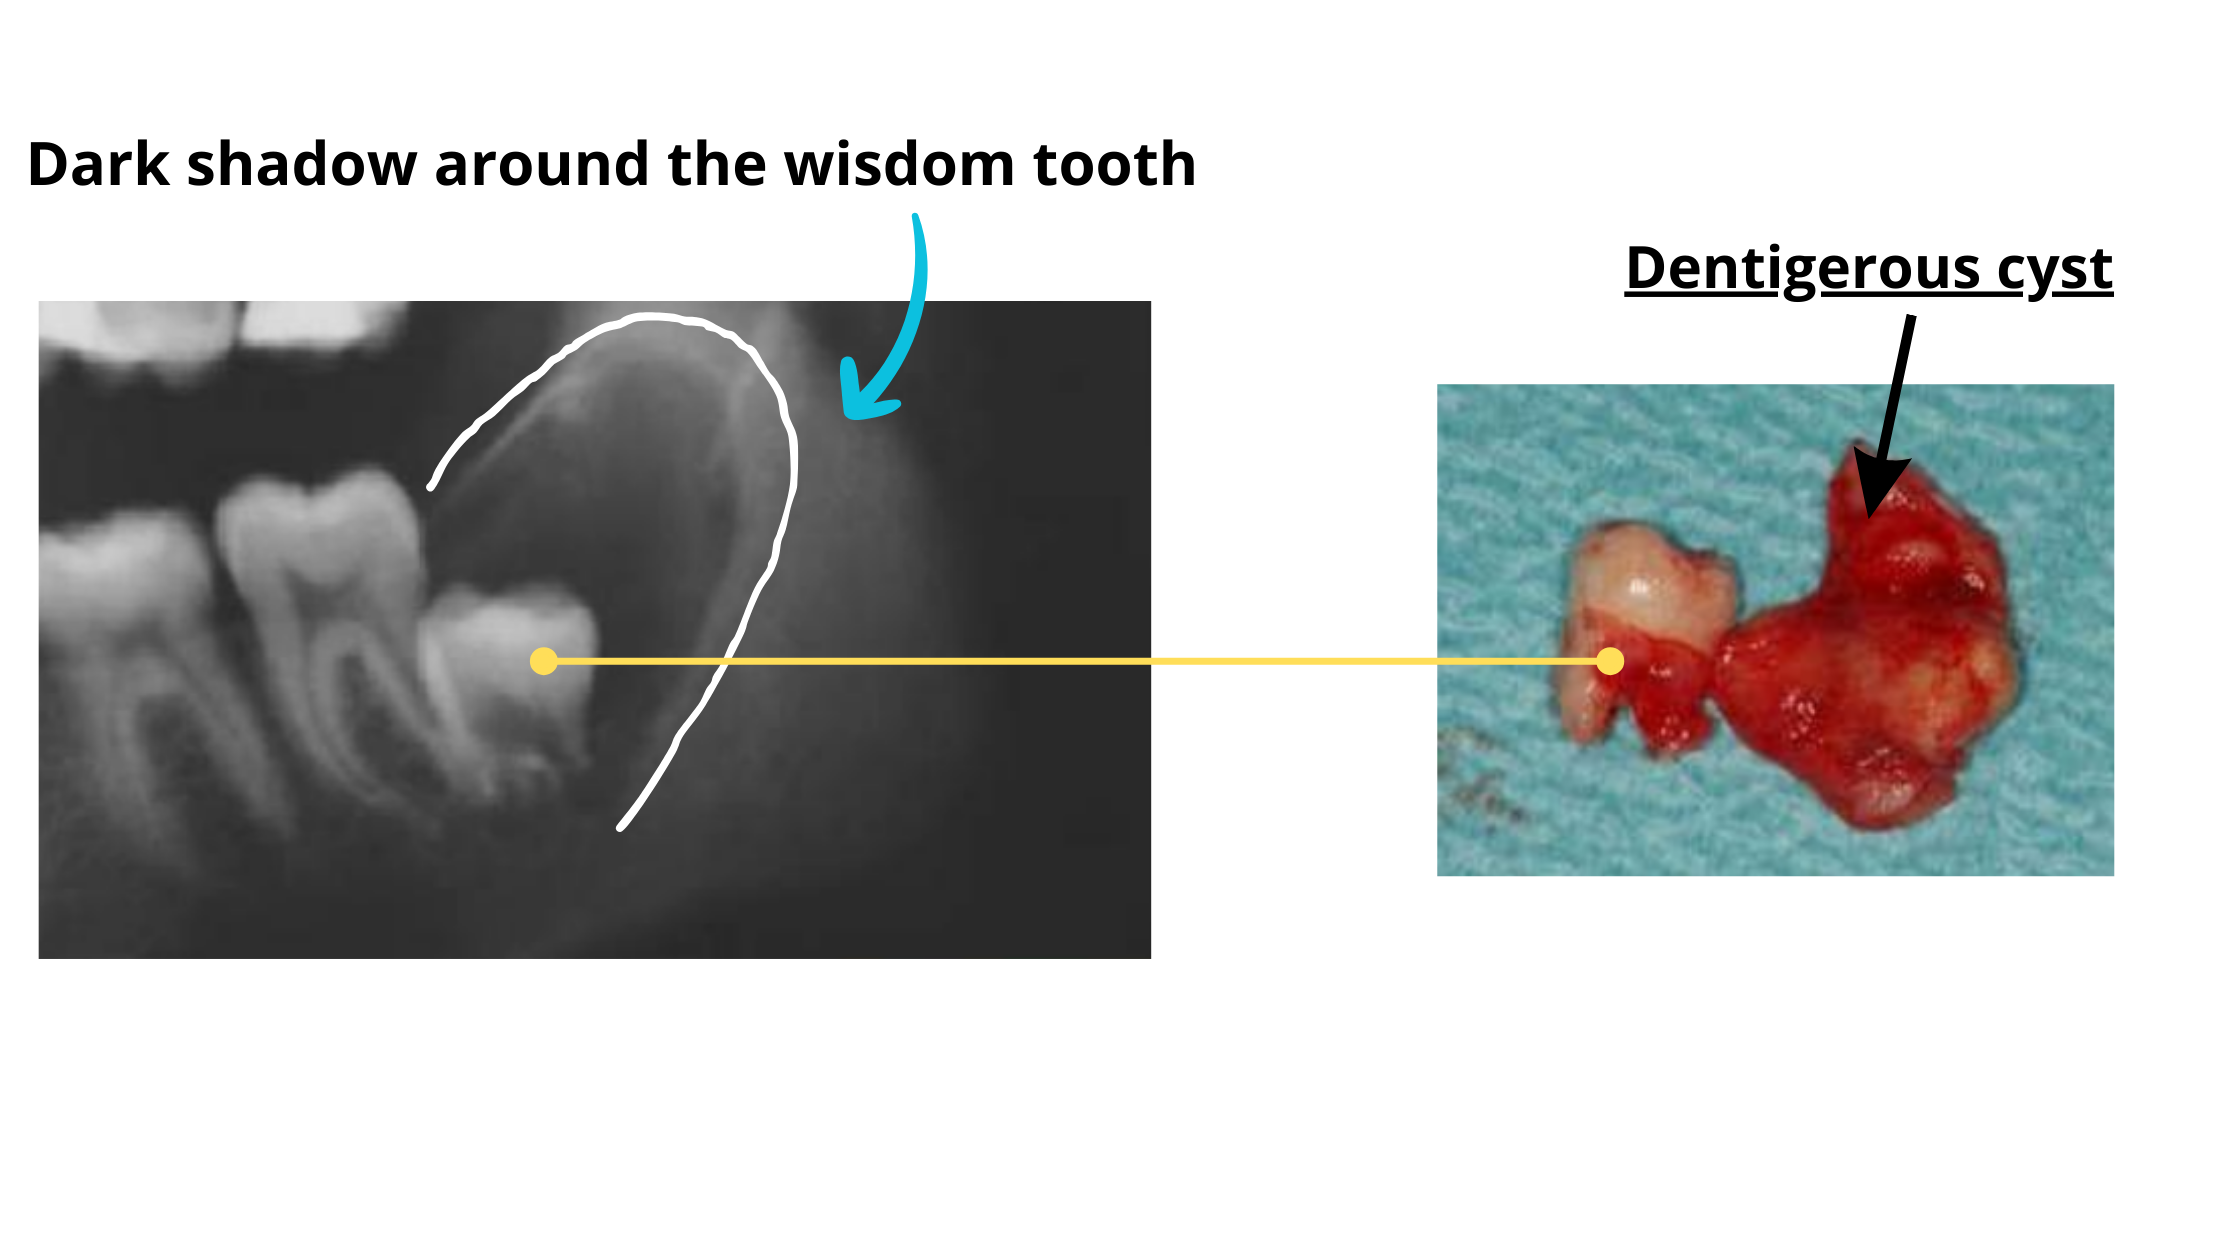 Image of a dentigerous cyst after wisdom tooth extraction with a preoperative X-ray image